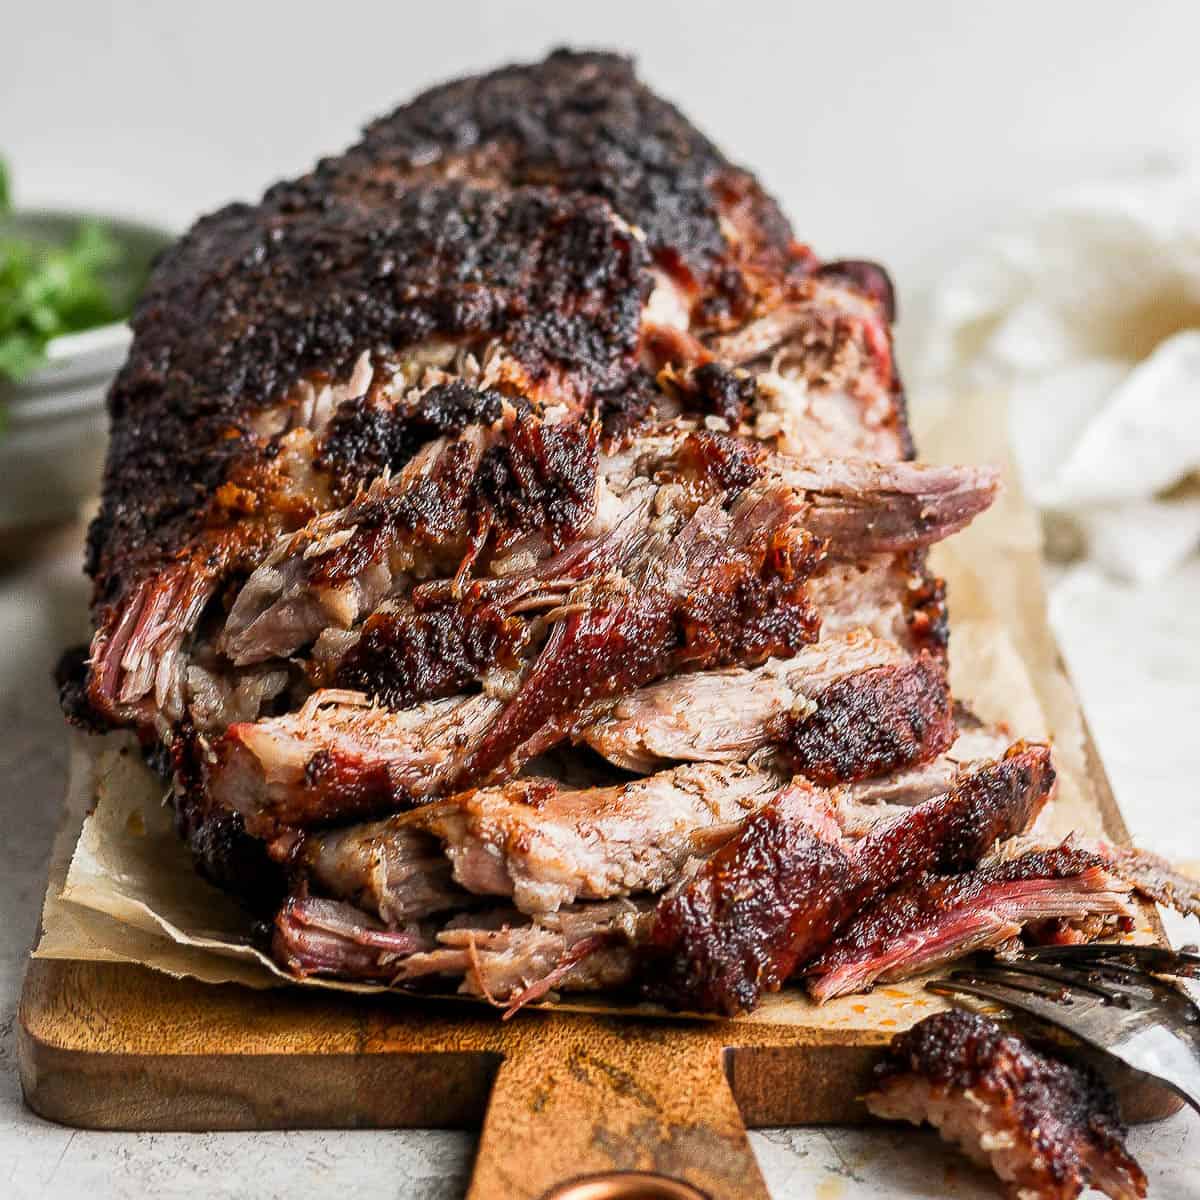 A GUIDE TO PREPARING THE PORK SHOULDER FOR YOUR SMOKER